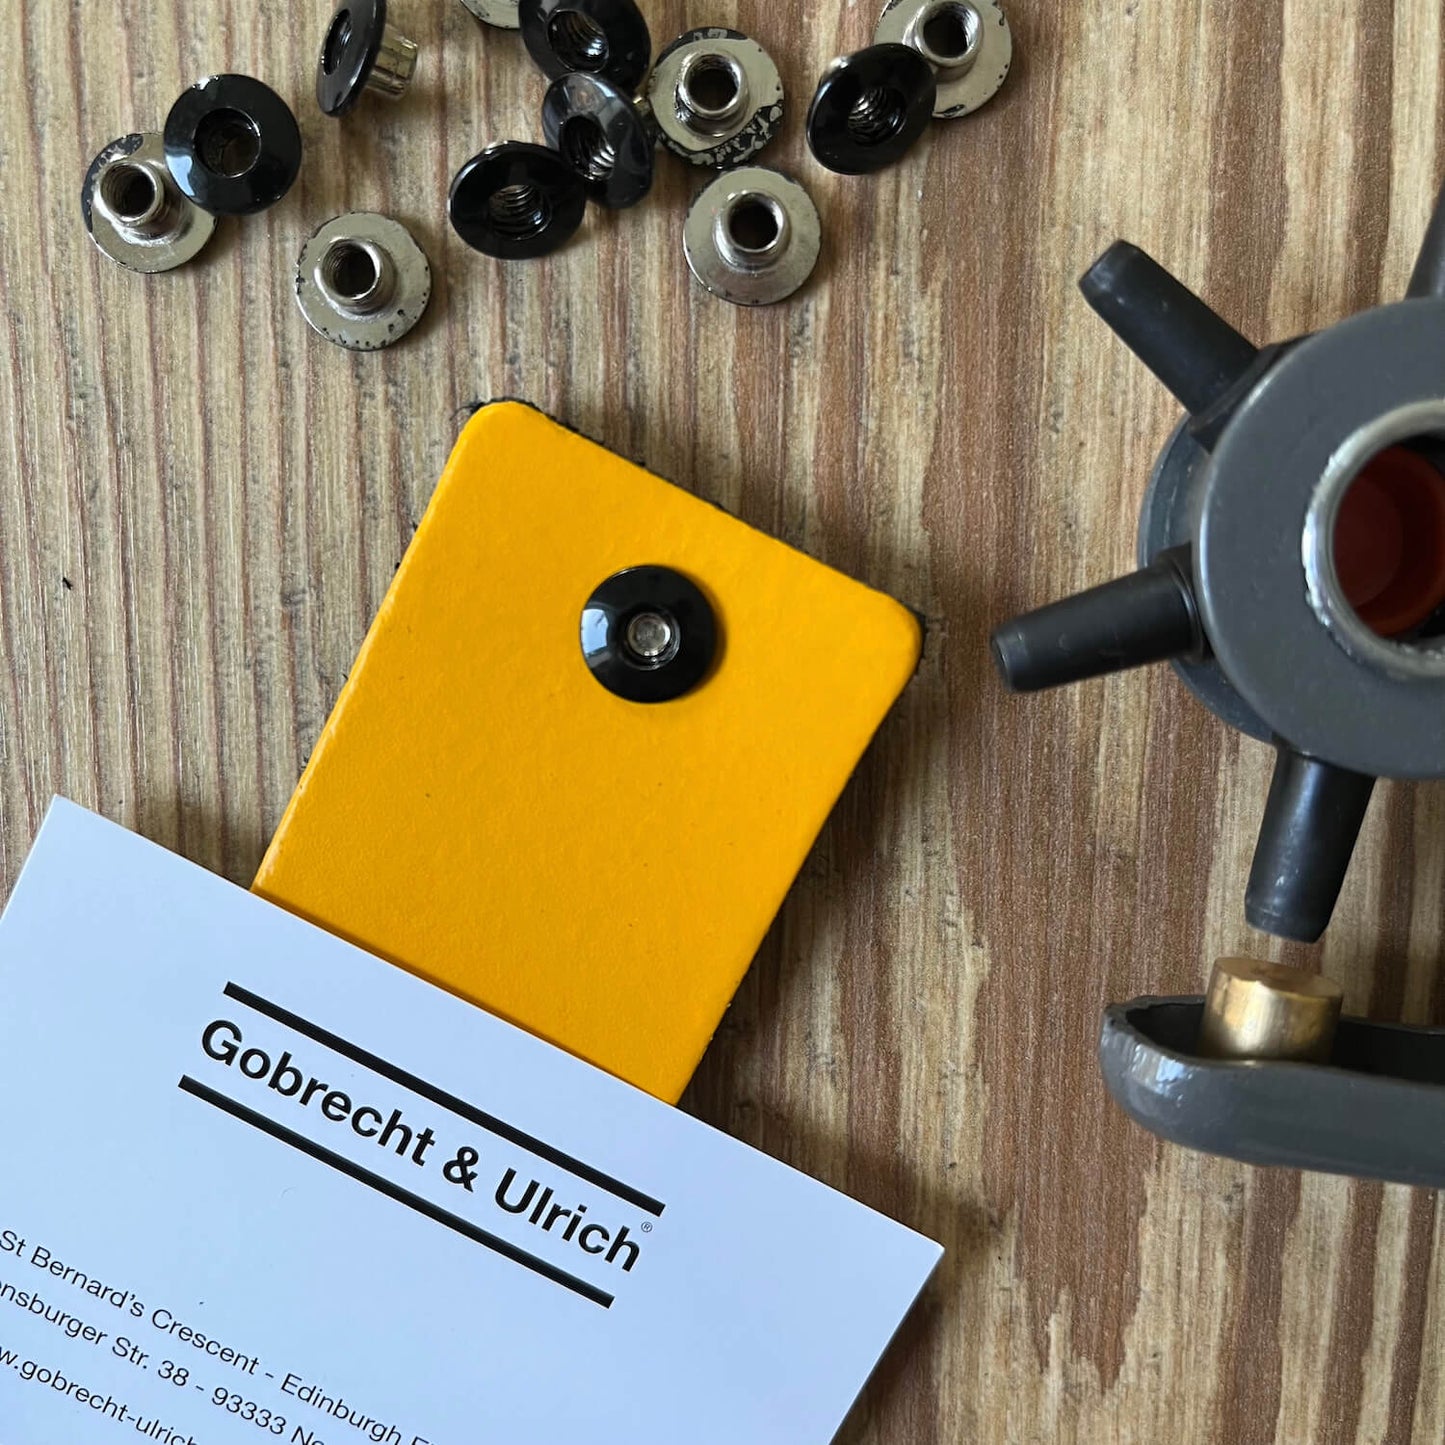 Short black binding screws scattered on a wooden surface, a silver binding screw fastened to a piece of bright yellow leather, and a leather hole punch